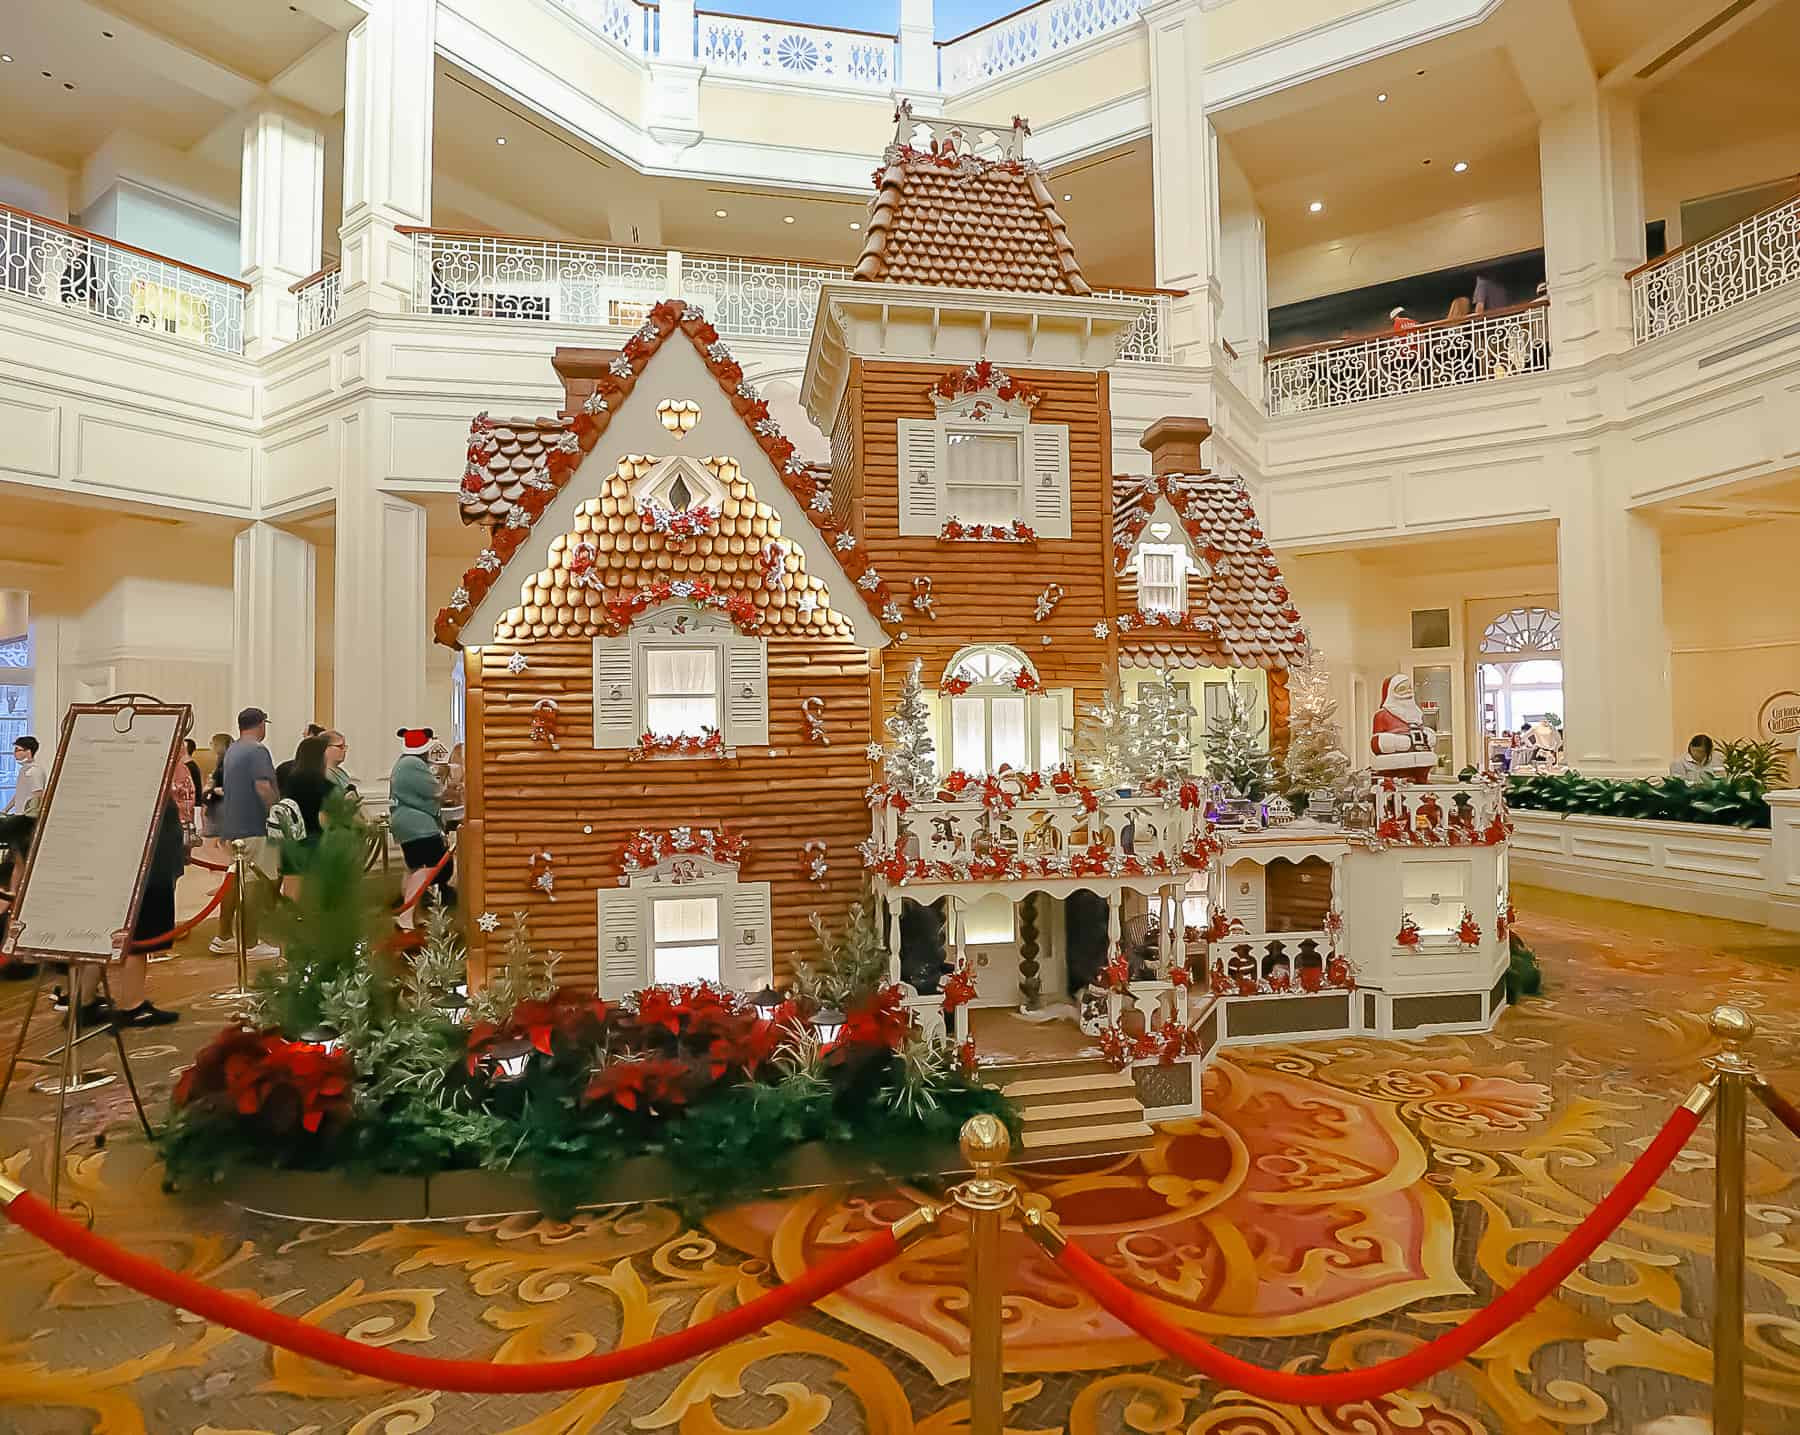 Disney’s Grand Floridian Gingerbread House (The Traditional Version Returns in 2023)